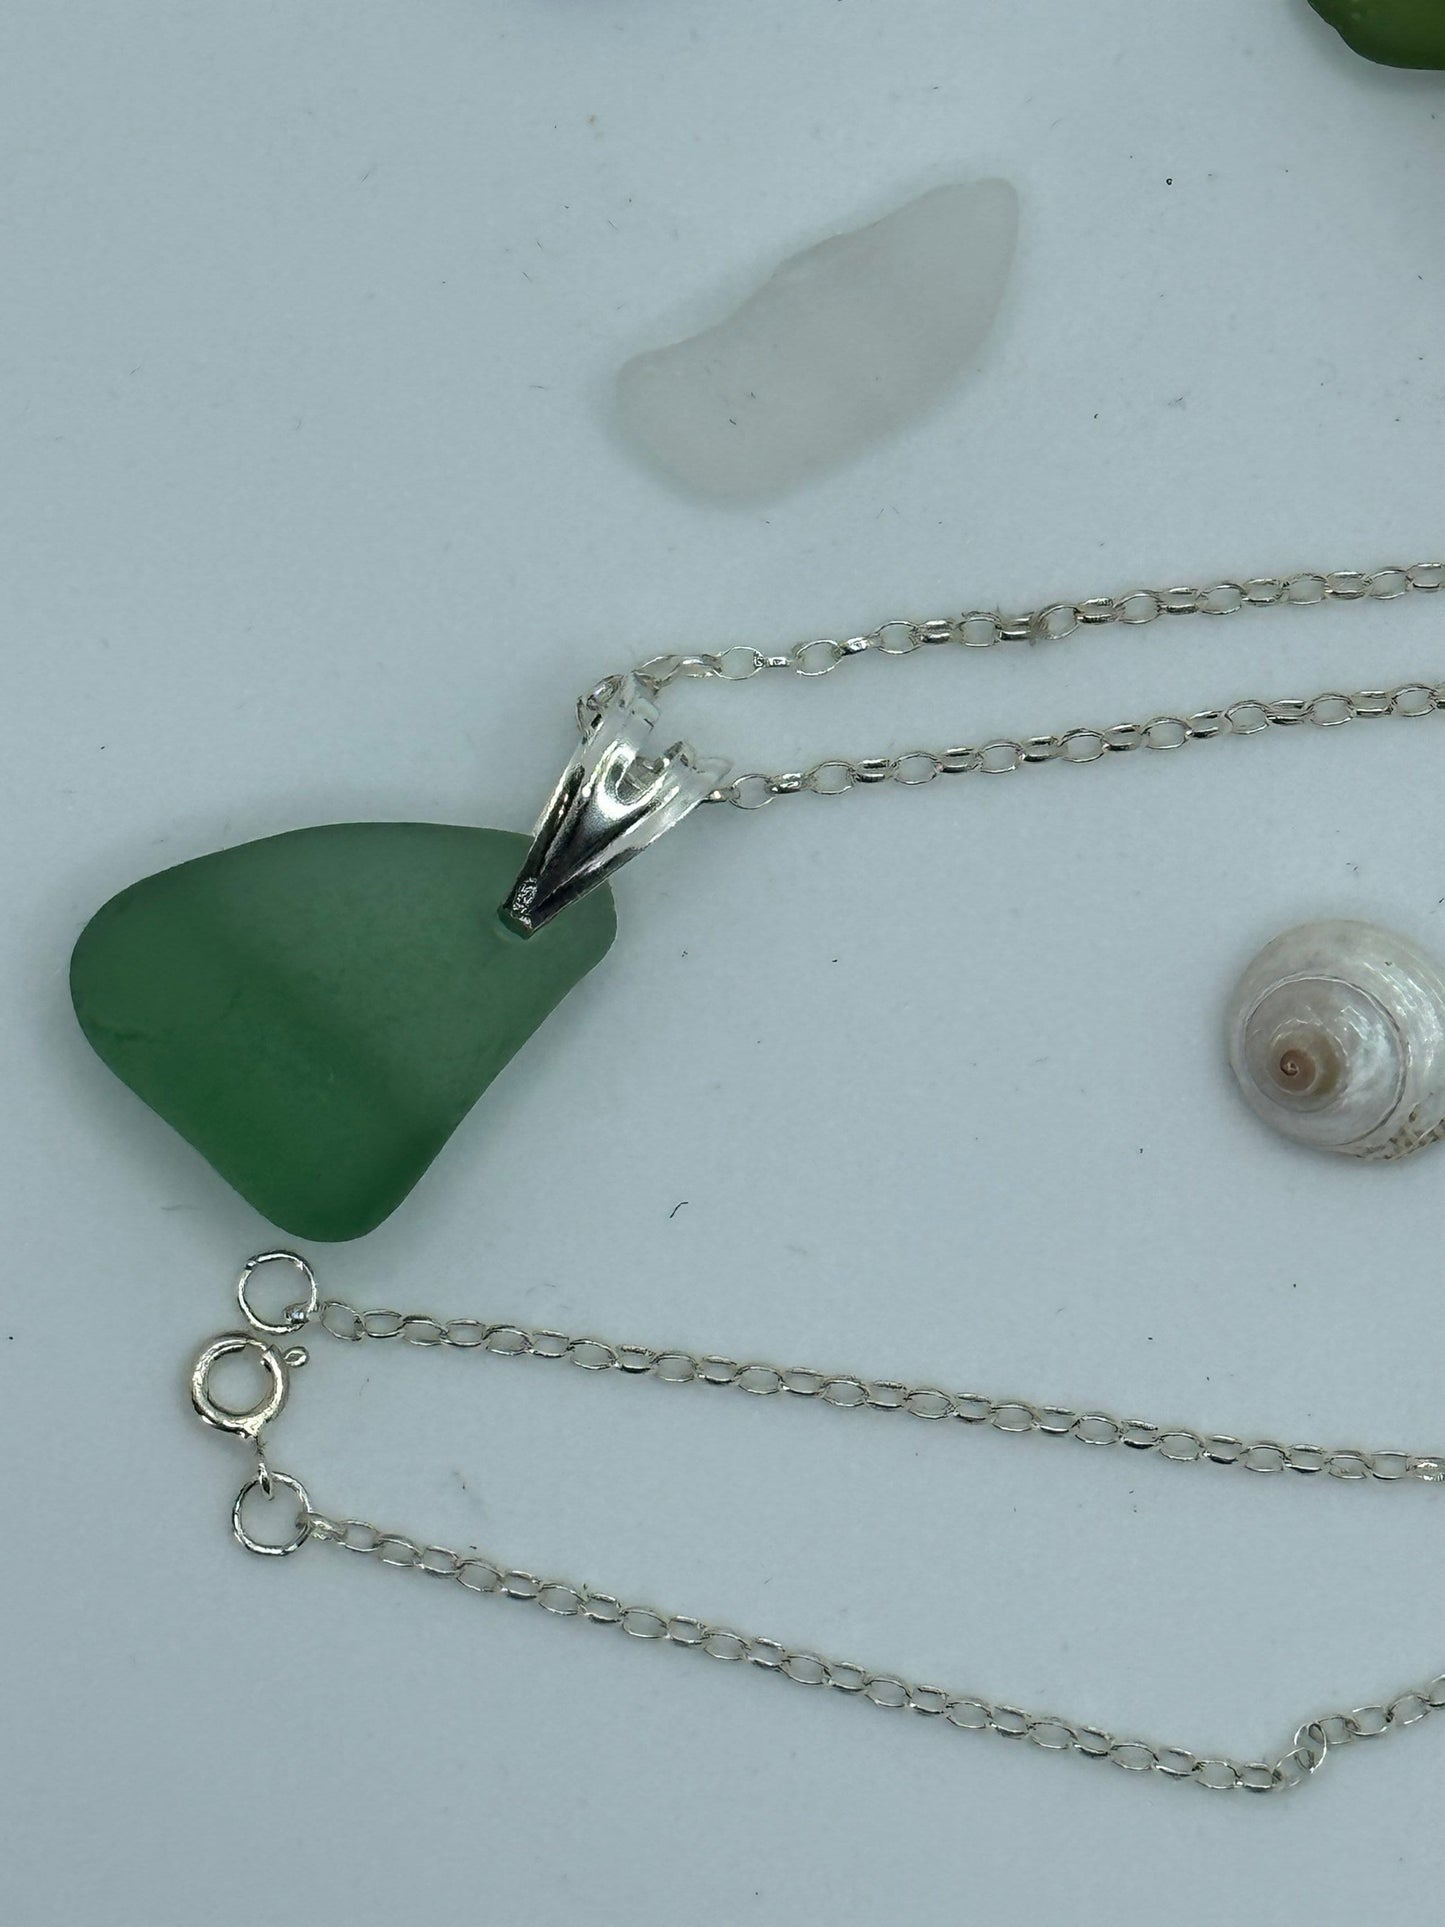 Green sea glass pendant necklace, sterling silver 925, green sea glass necklace, Aberdeenshire sea glass, Scottish sea Glass necklace,